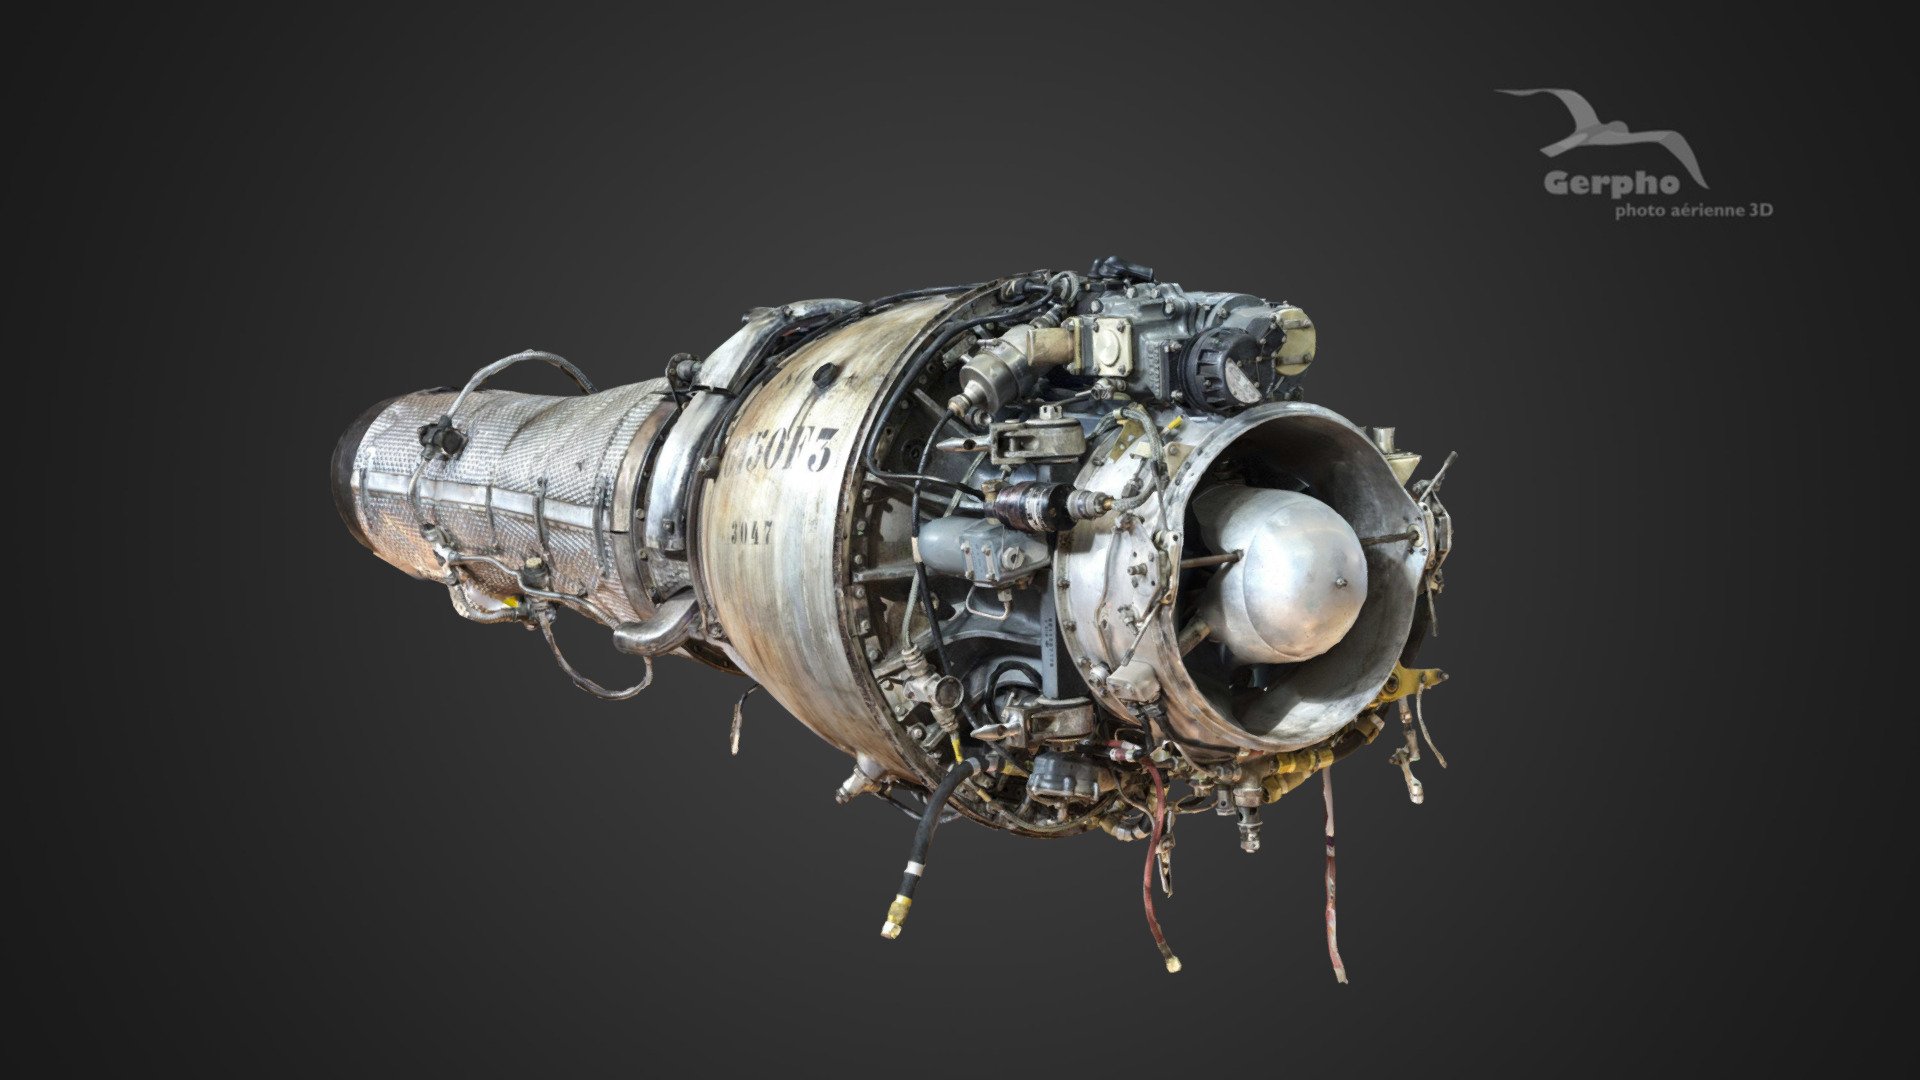 1951 : Young company Turbomeca develops a new type of engine : a jet engine, Marbore, for the famous &ldquo;Fouga Magister